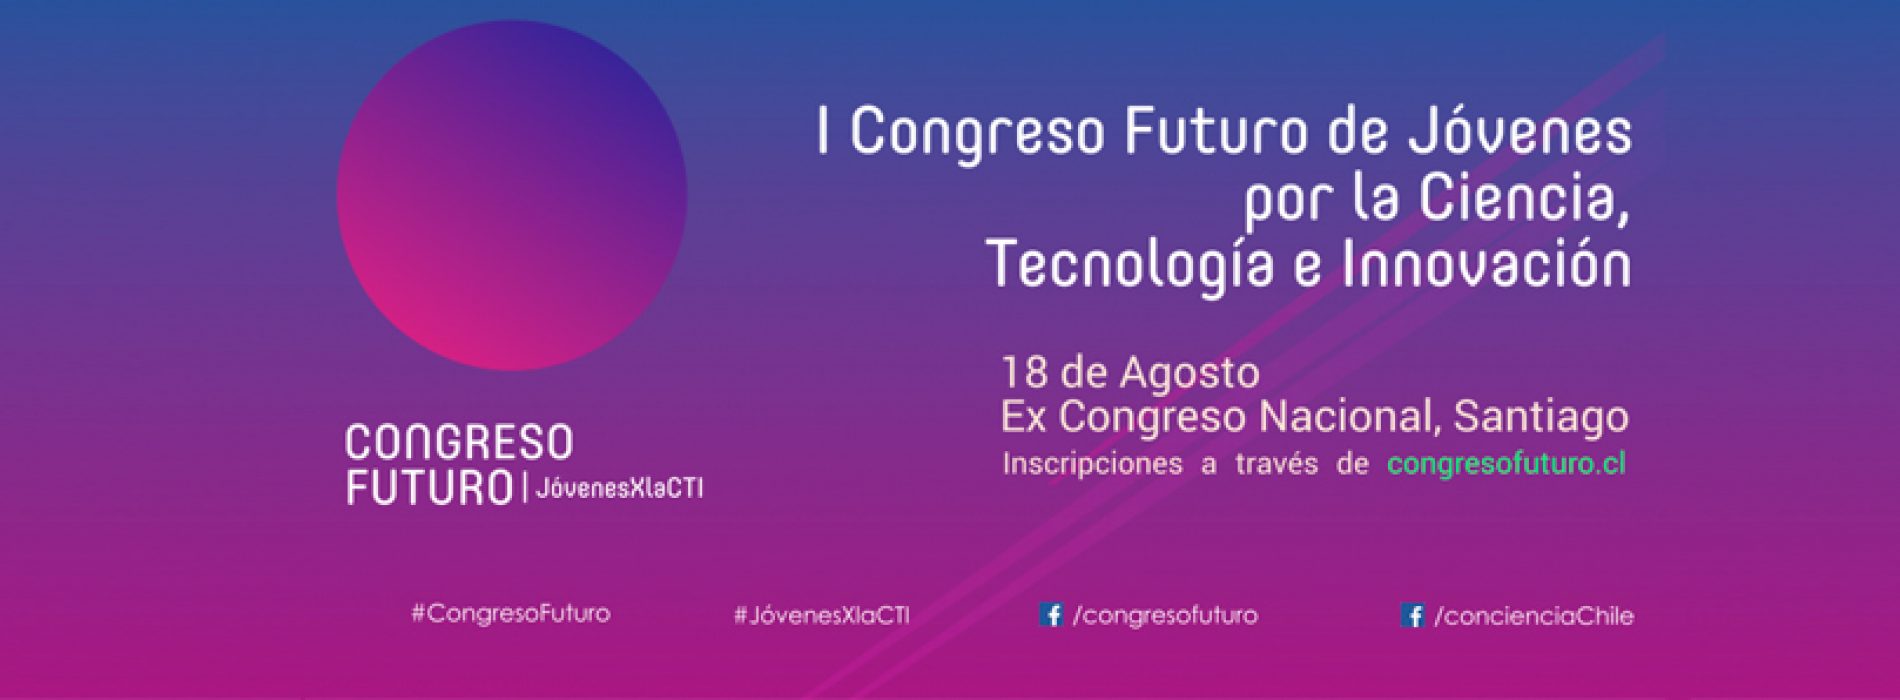 I Conference future of young people for science, technology and innovation